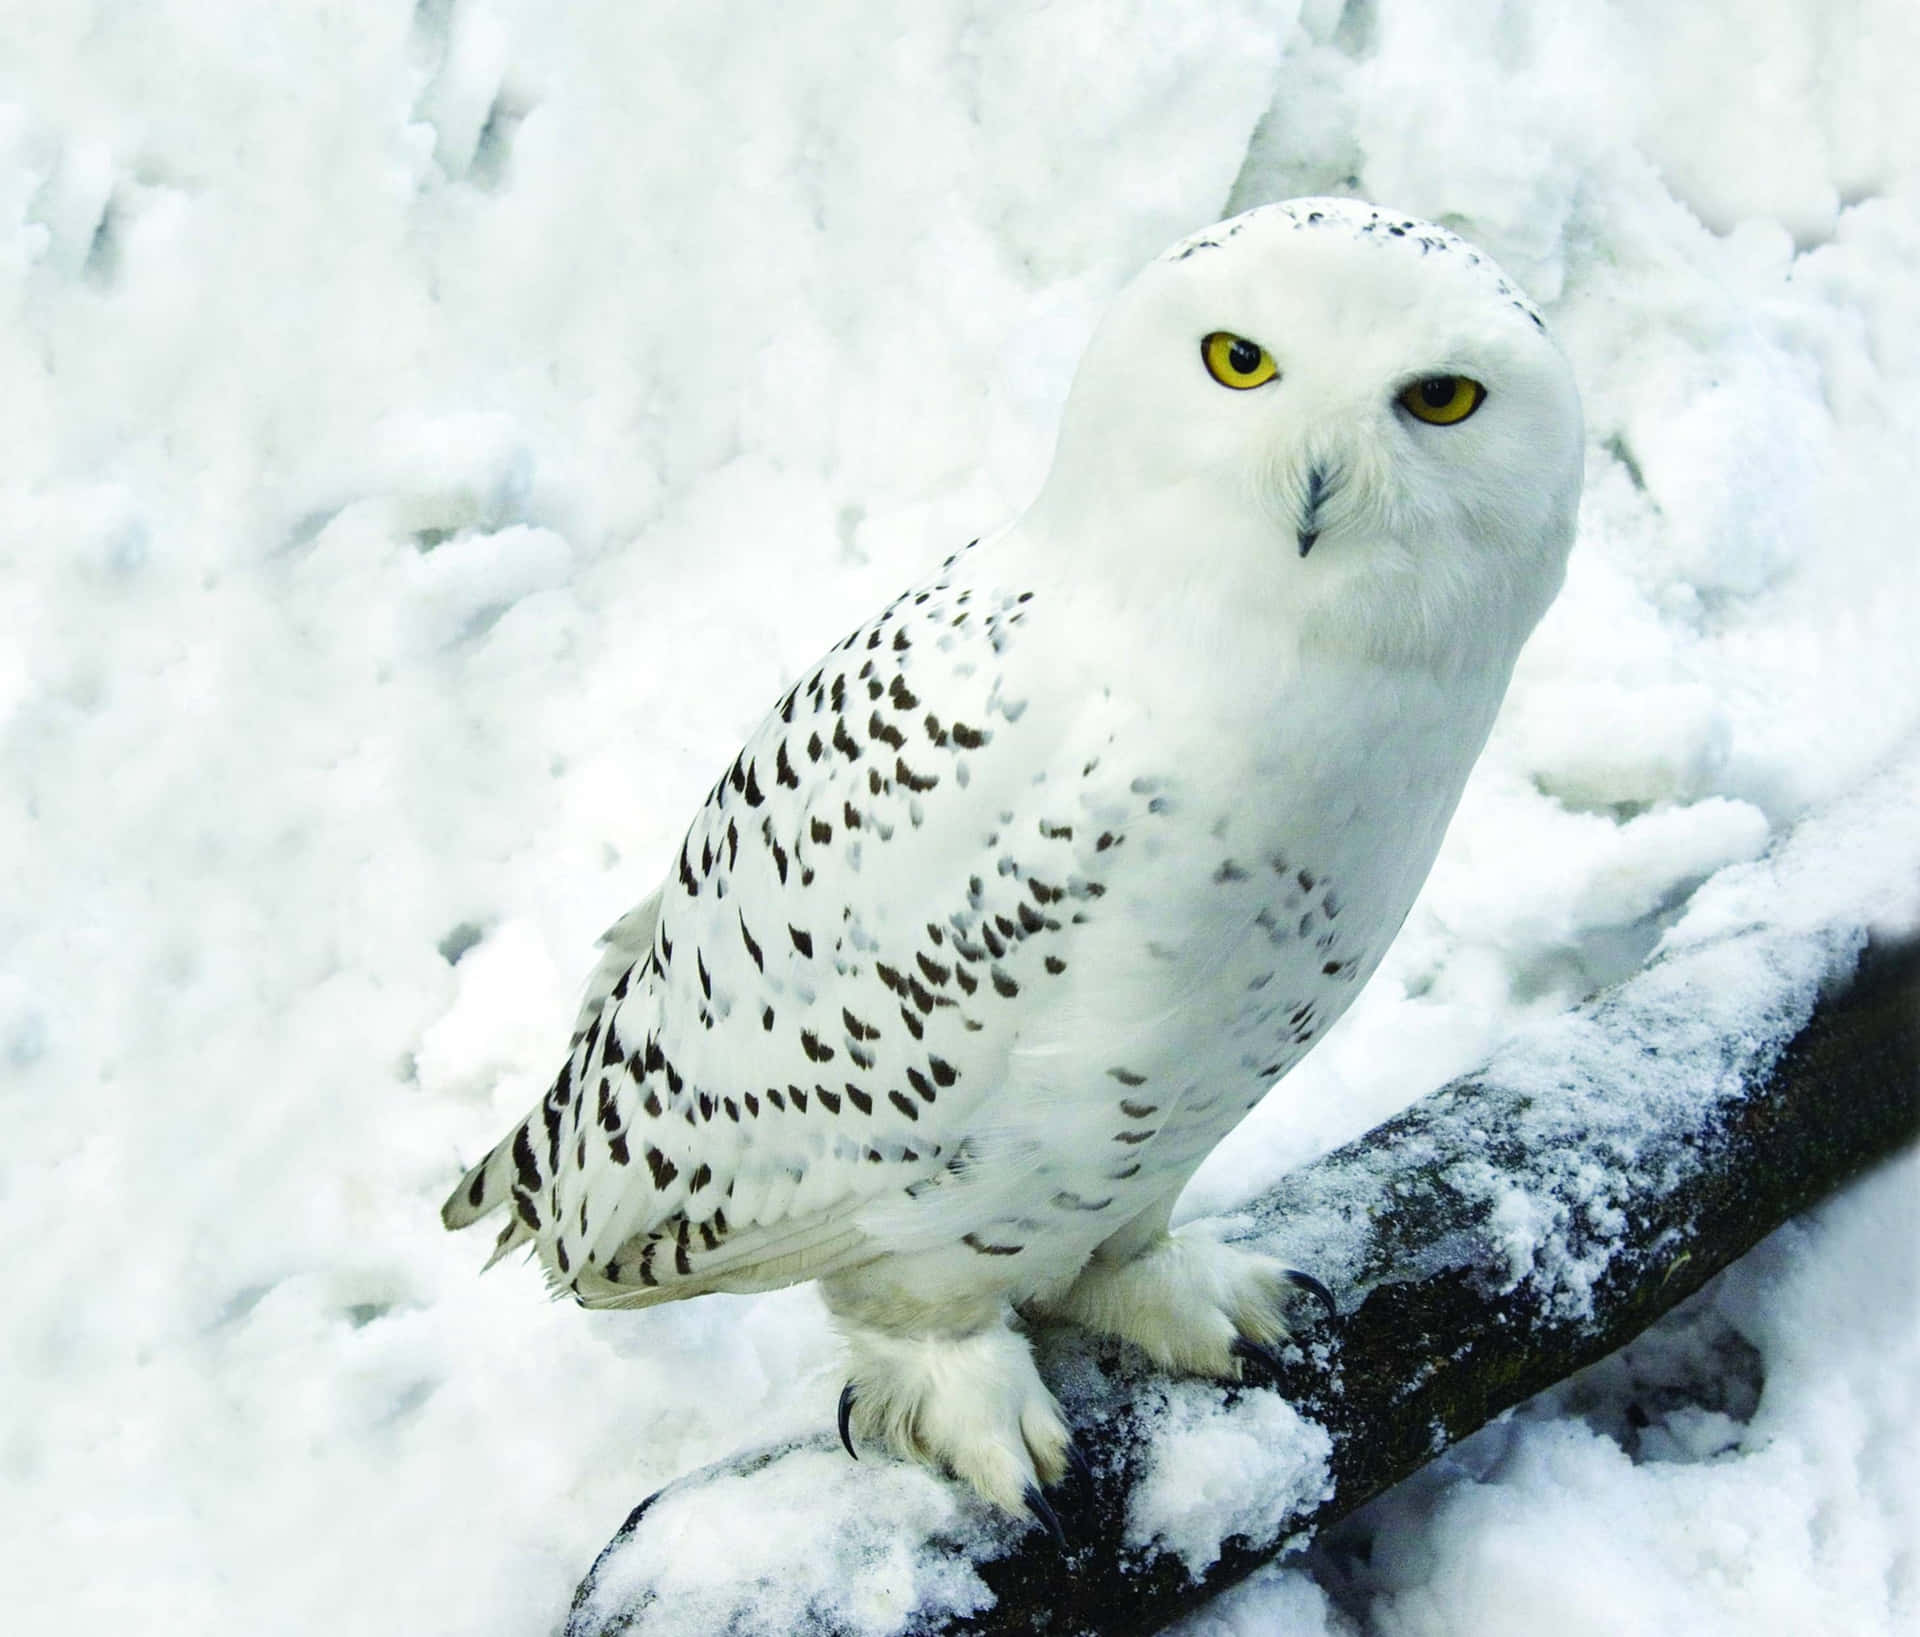 Majestic Snowy Owl Perched in its Natural Habitat Wallpaper